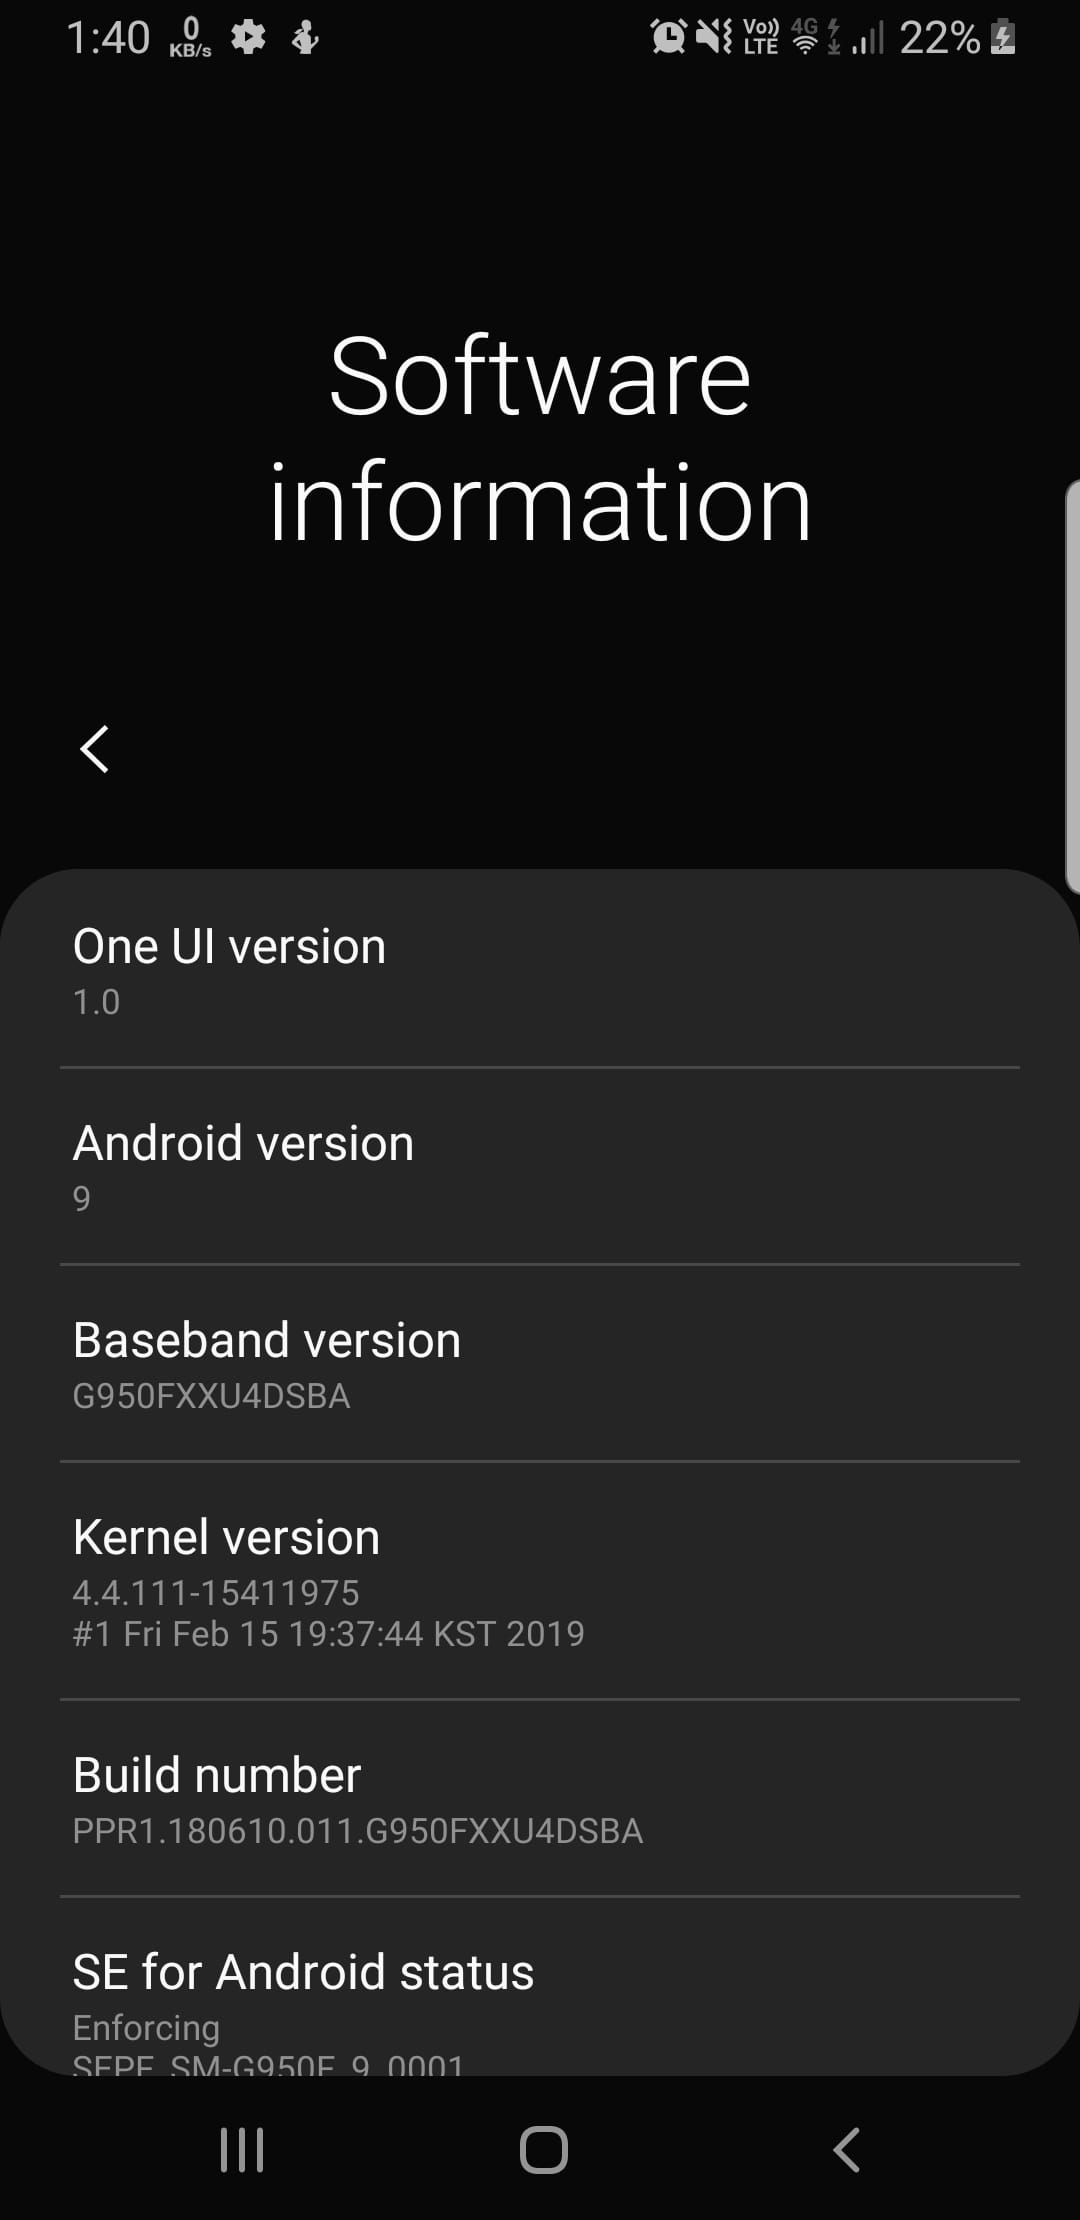 S8 One UI Software Details